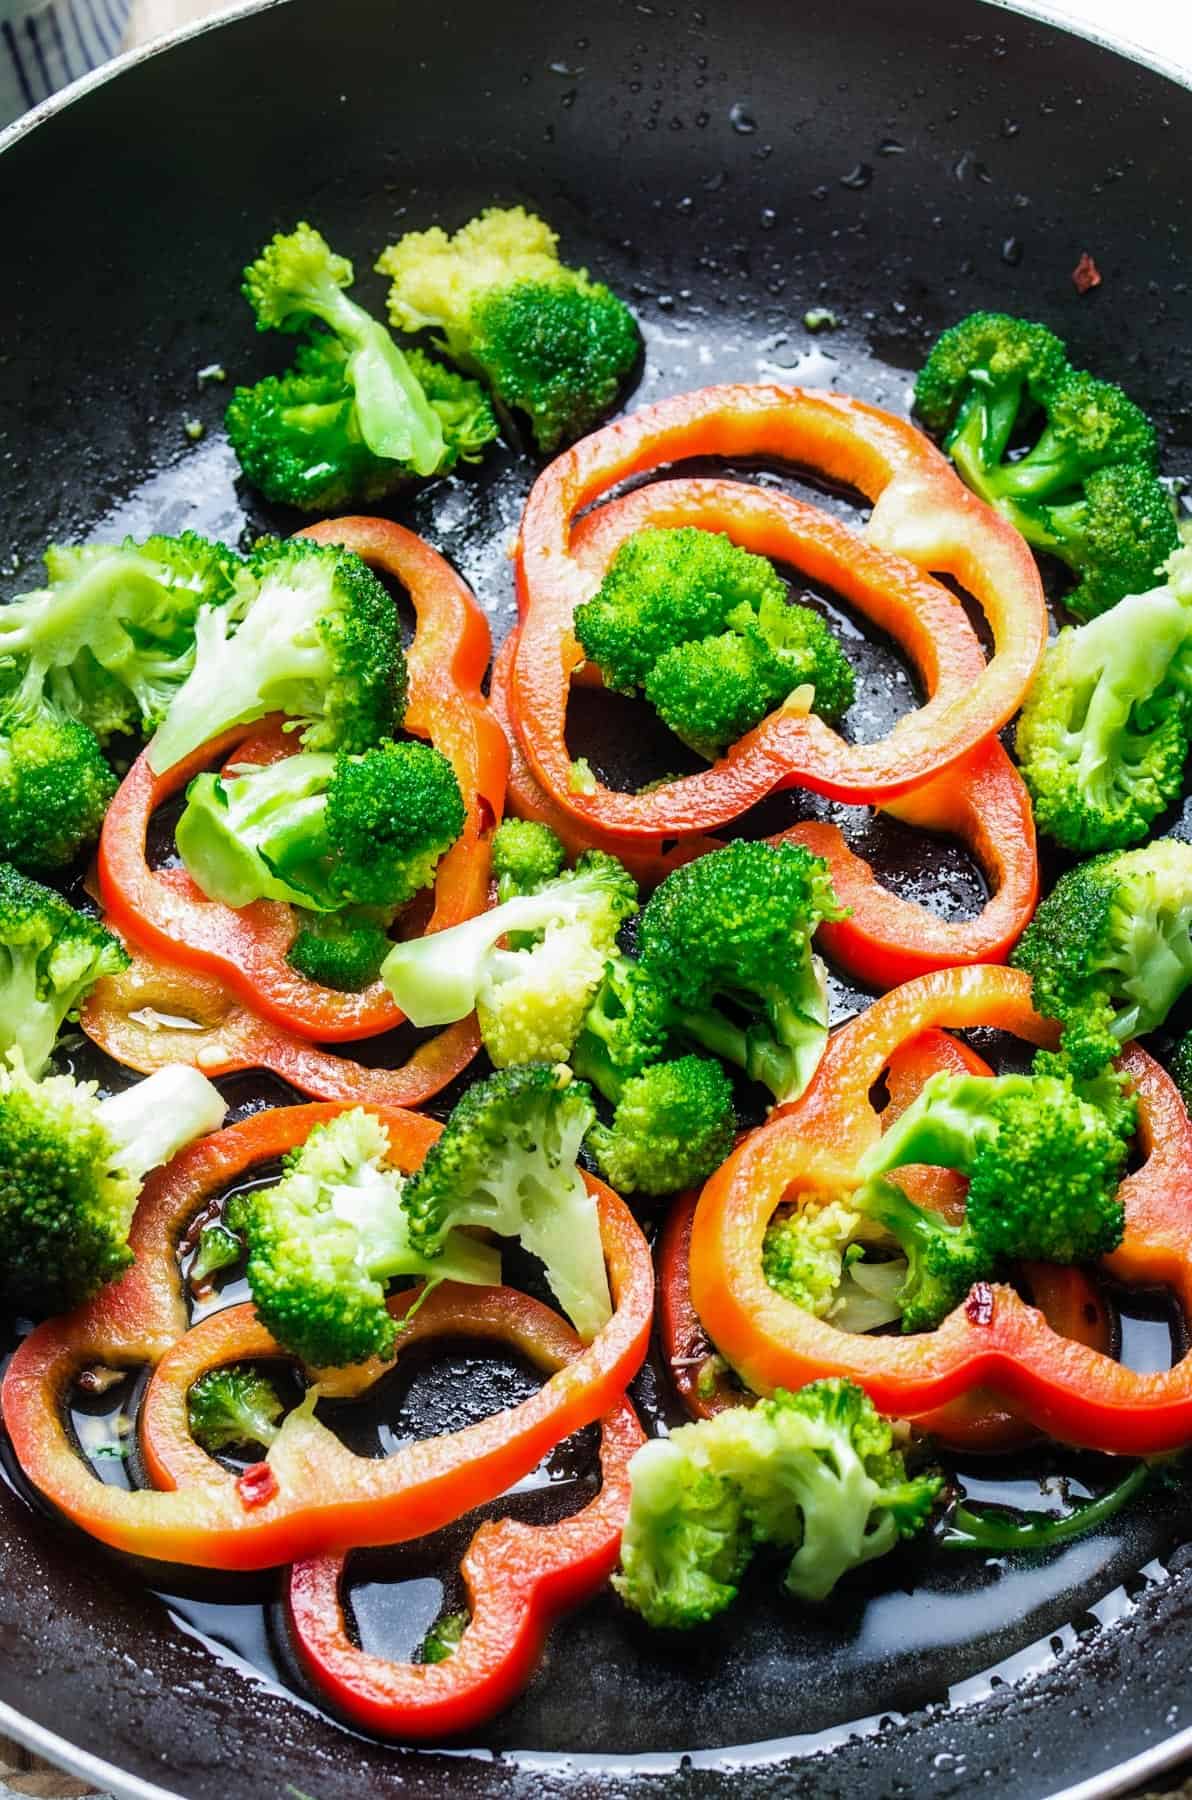 Broccoli florets and sliced peppers inside of a saucepan with vegetable oil.